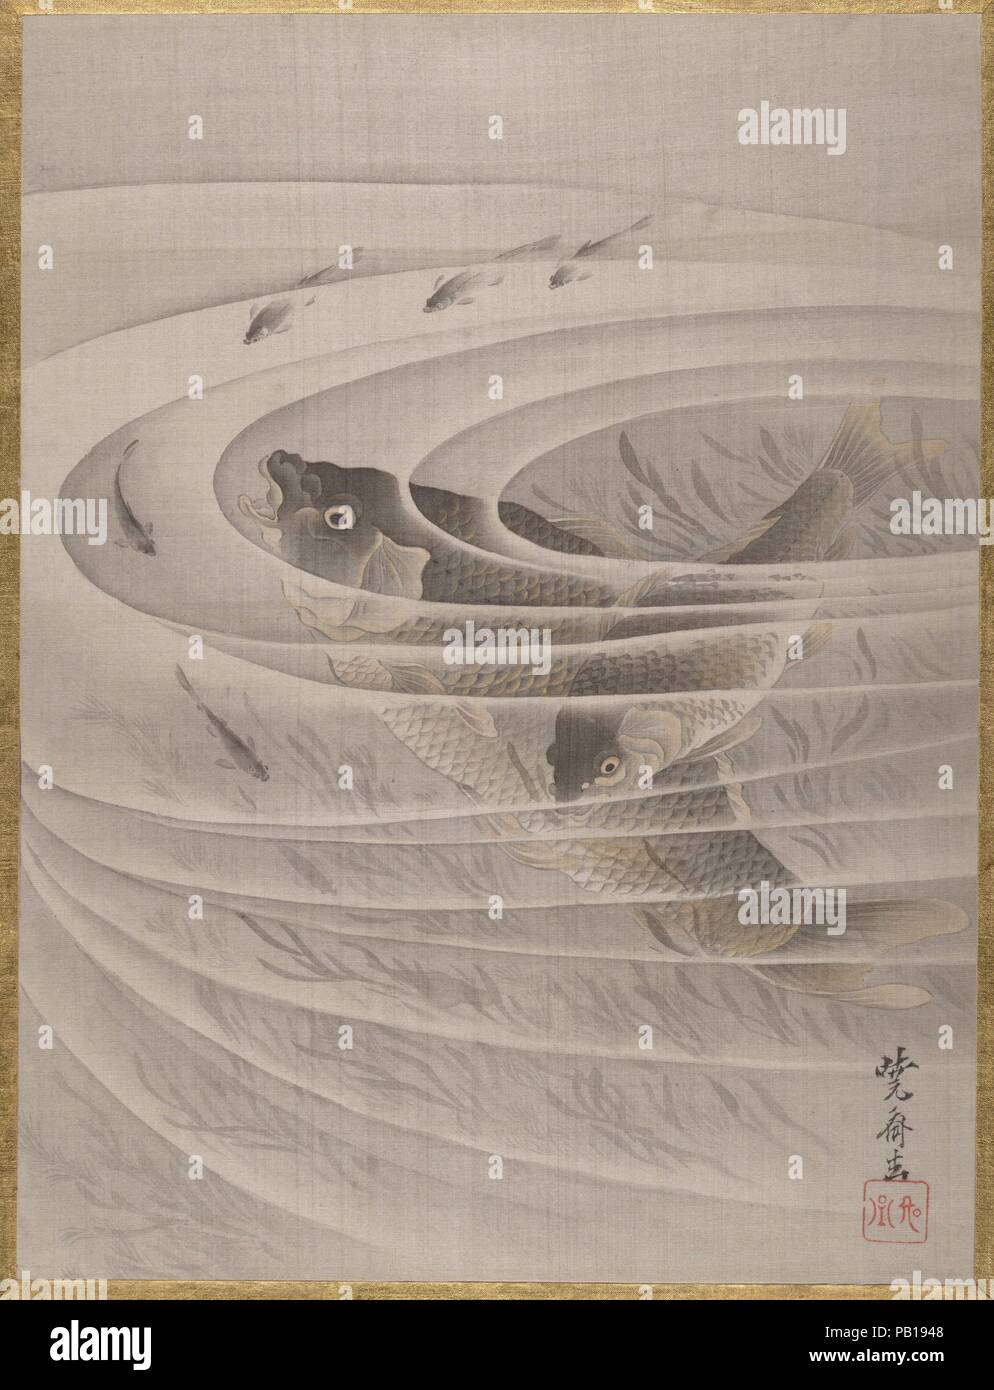 Fish in a Whirlpool. Artist: Kawanabe Kyosai (Japanese, 1831-1889). Culture: Japan. Dimensions: 14 1/8 x 10 3/4 in. (35.9 x 27.3 cm). Date: ca. 1887. Museum: Metropolitan Museum of Art, New York, USA. Stock Photo